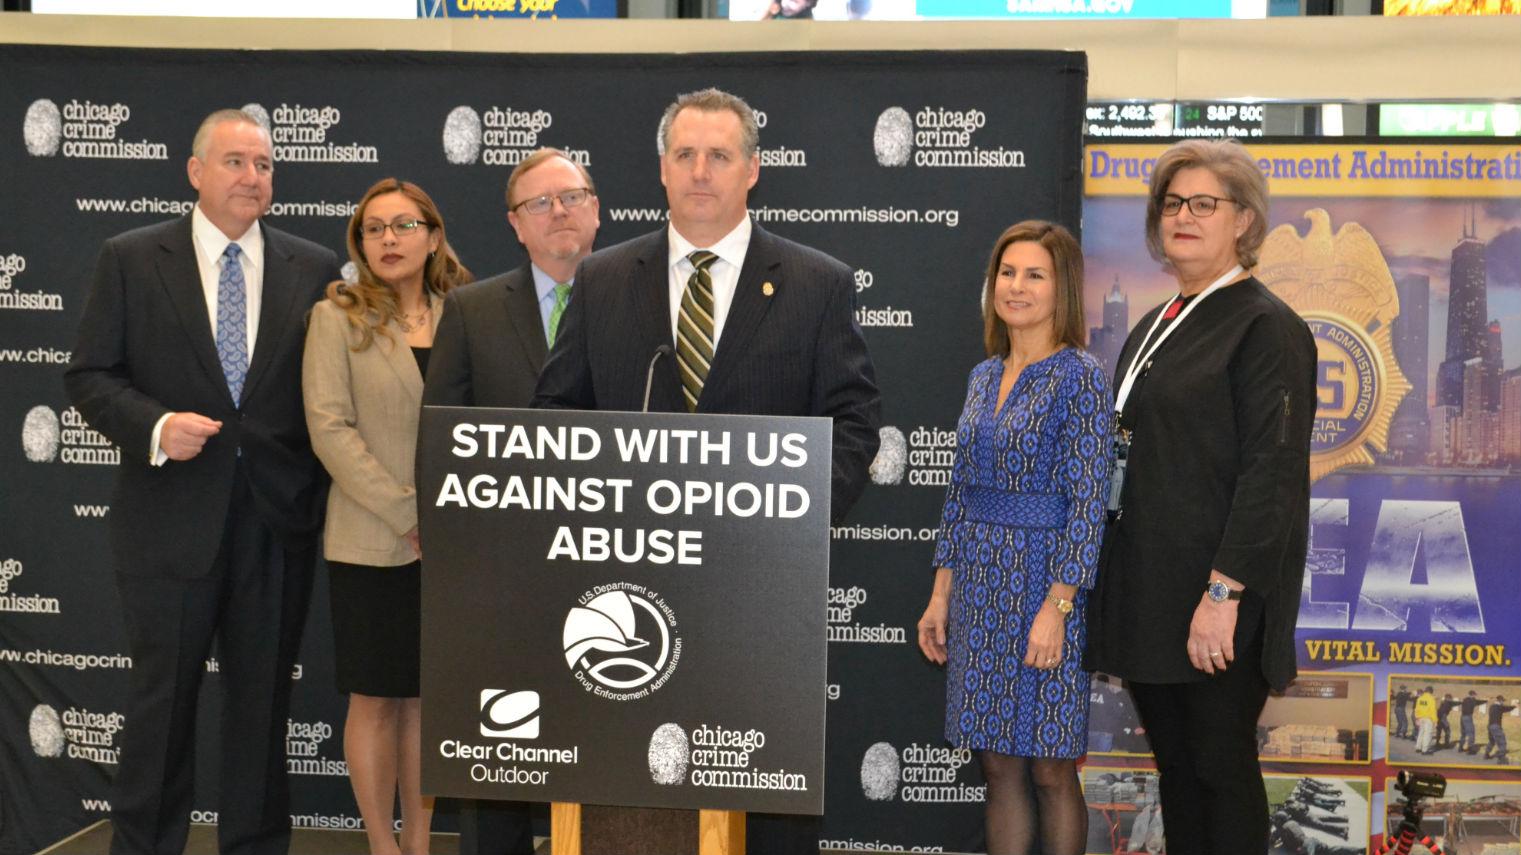 Robert J. Bell, U.S. DEA associate special agent in charge of the Chicago field division office, announces Thursday, Feb. 14 the launch of a yearlong digital billboard campaign against the opioid epidemic. (Kristen Thometz / Chicago Tonight)